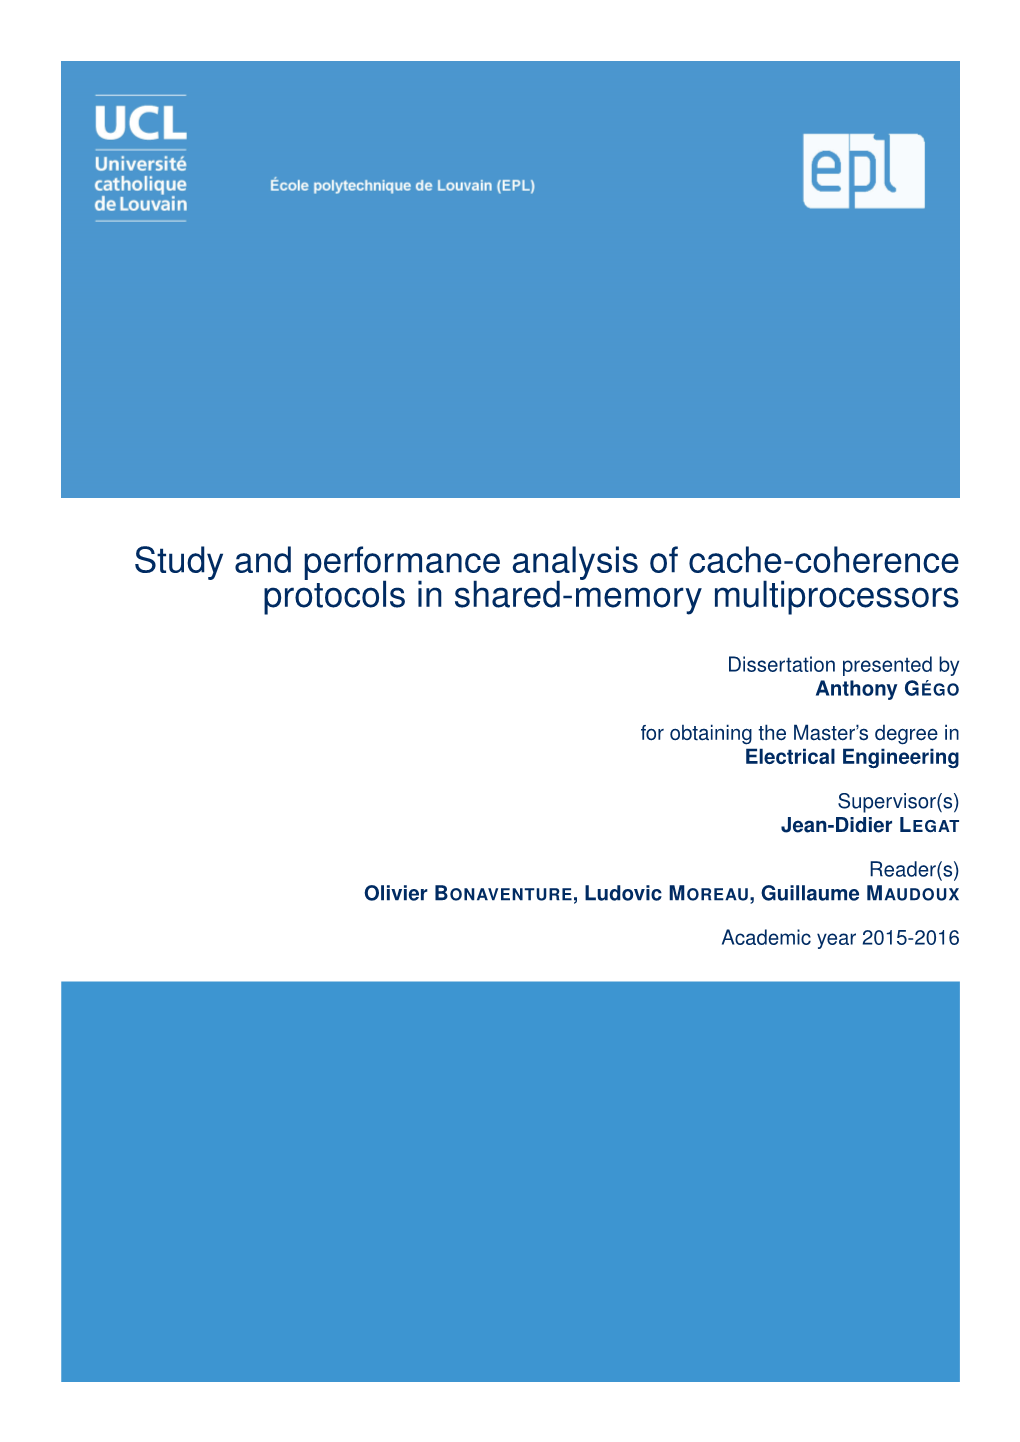 Study and Performance Analysis of Cache-Coherence Protocols in Shared-Memory Multiprocessors